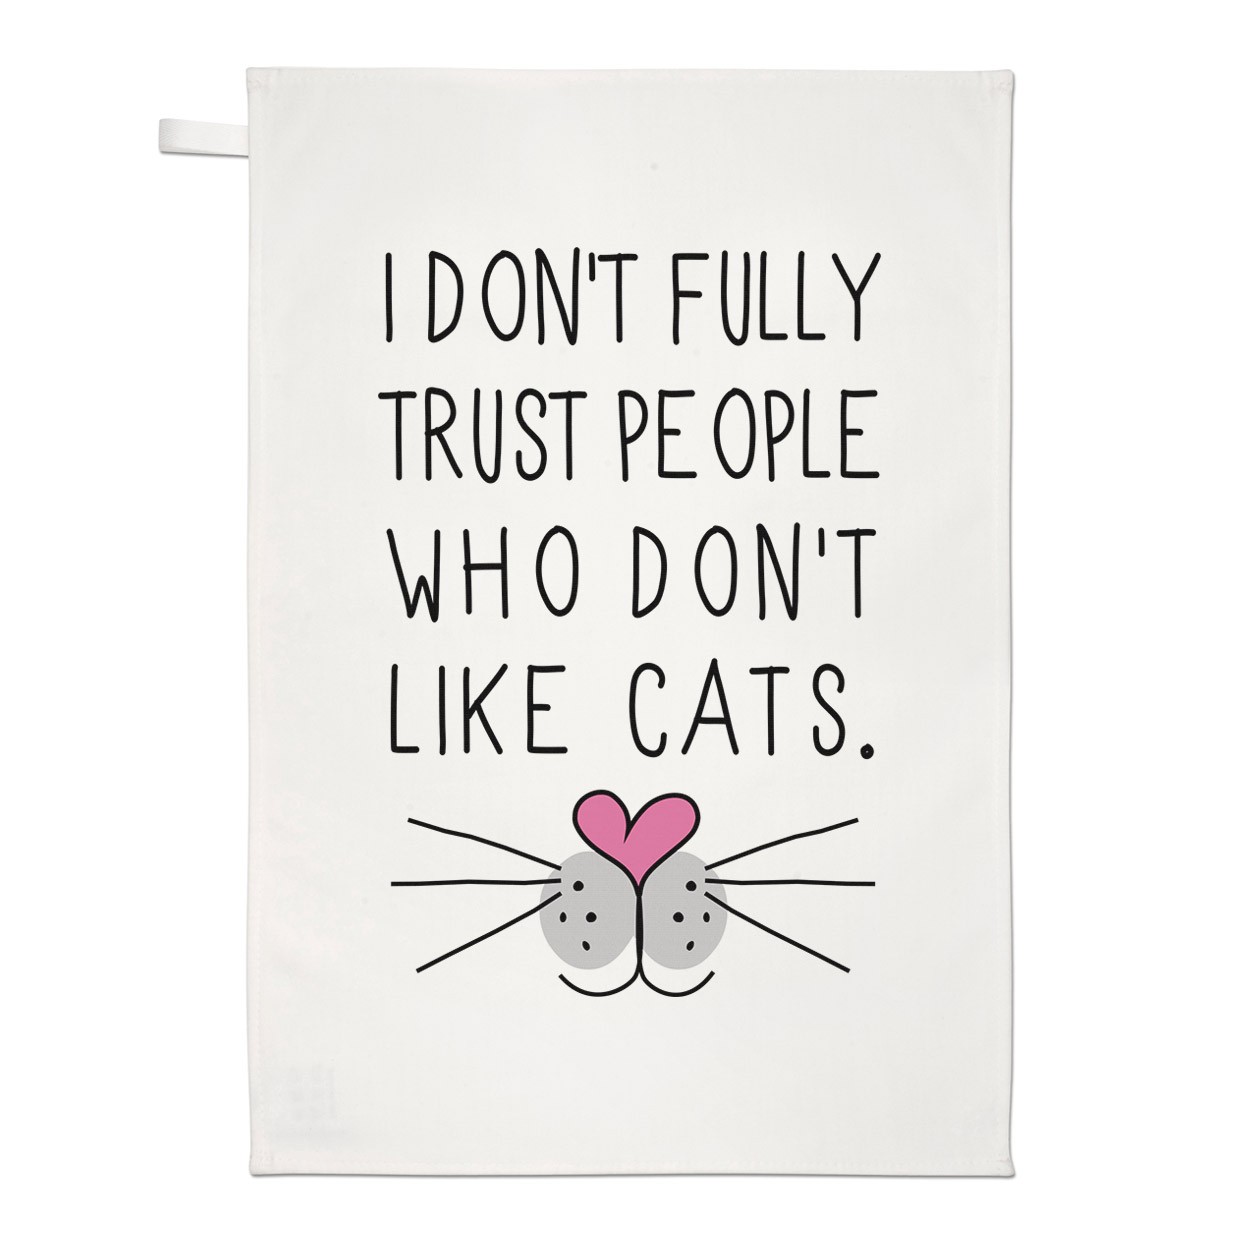 I Don't Fully Trust People Who Don't Like Cats Tea Towel Dish Cloth